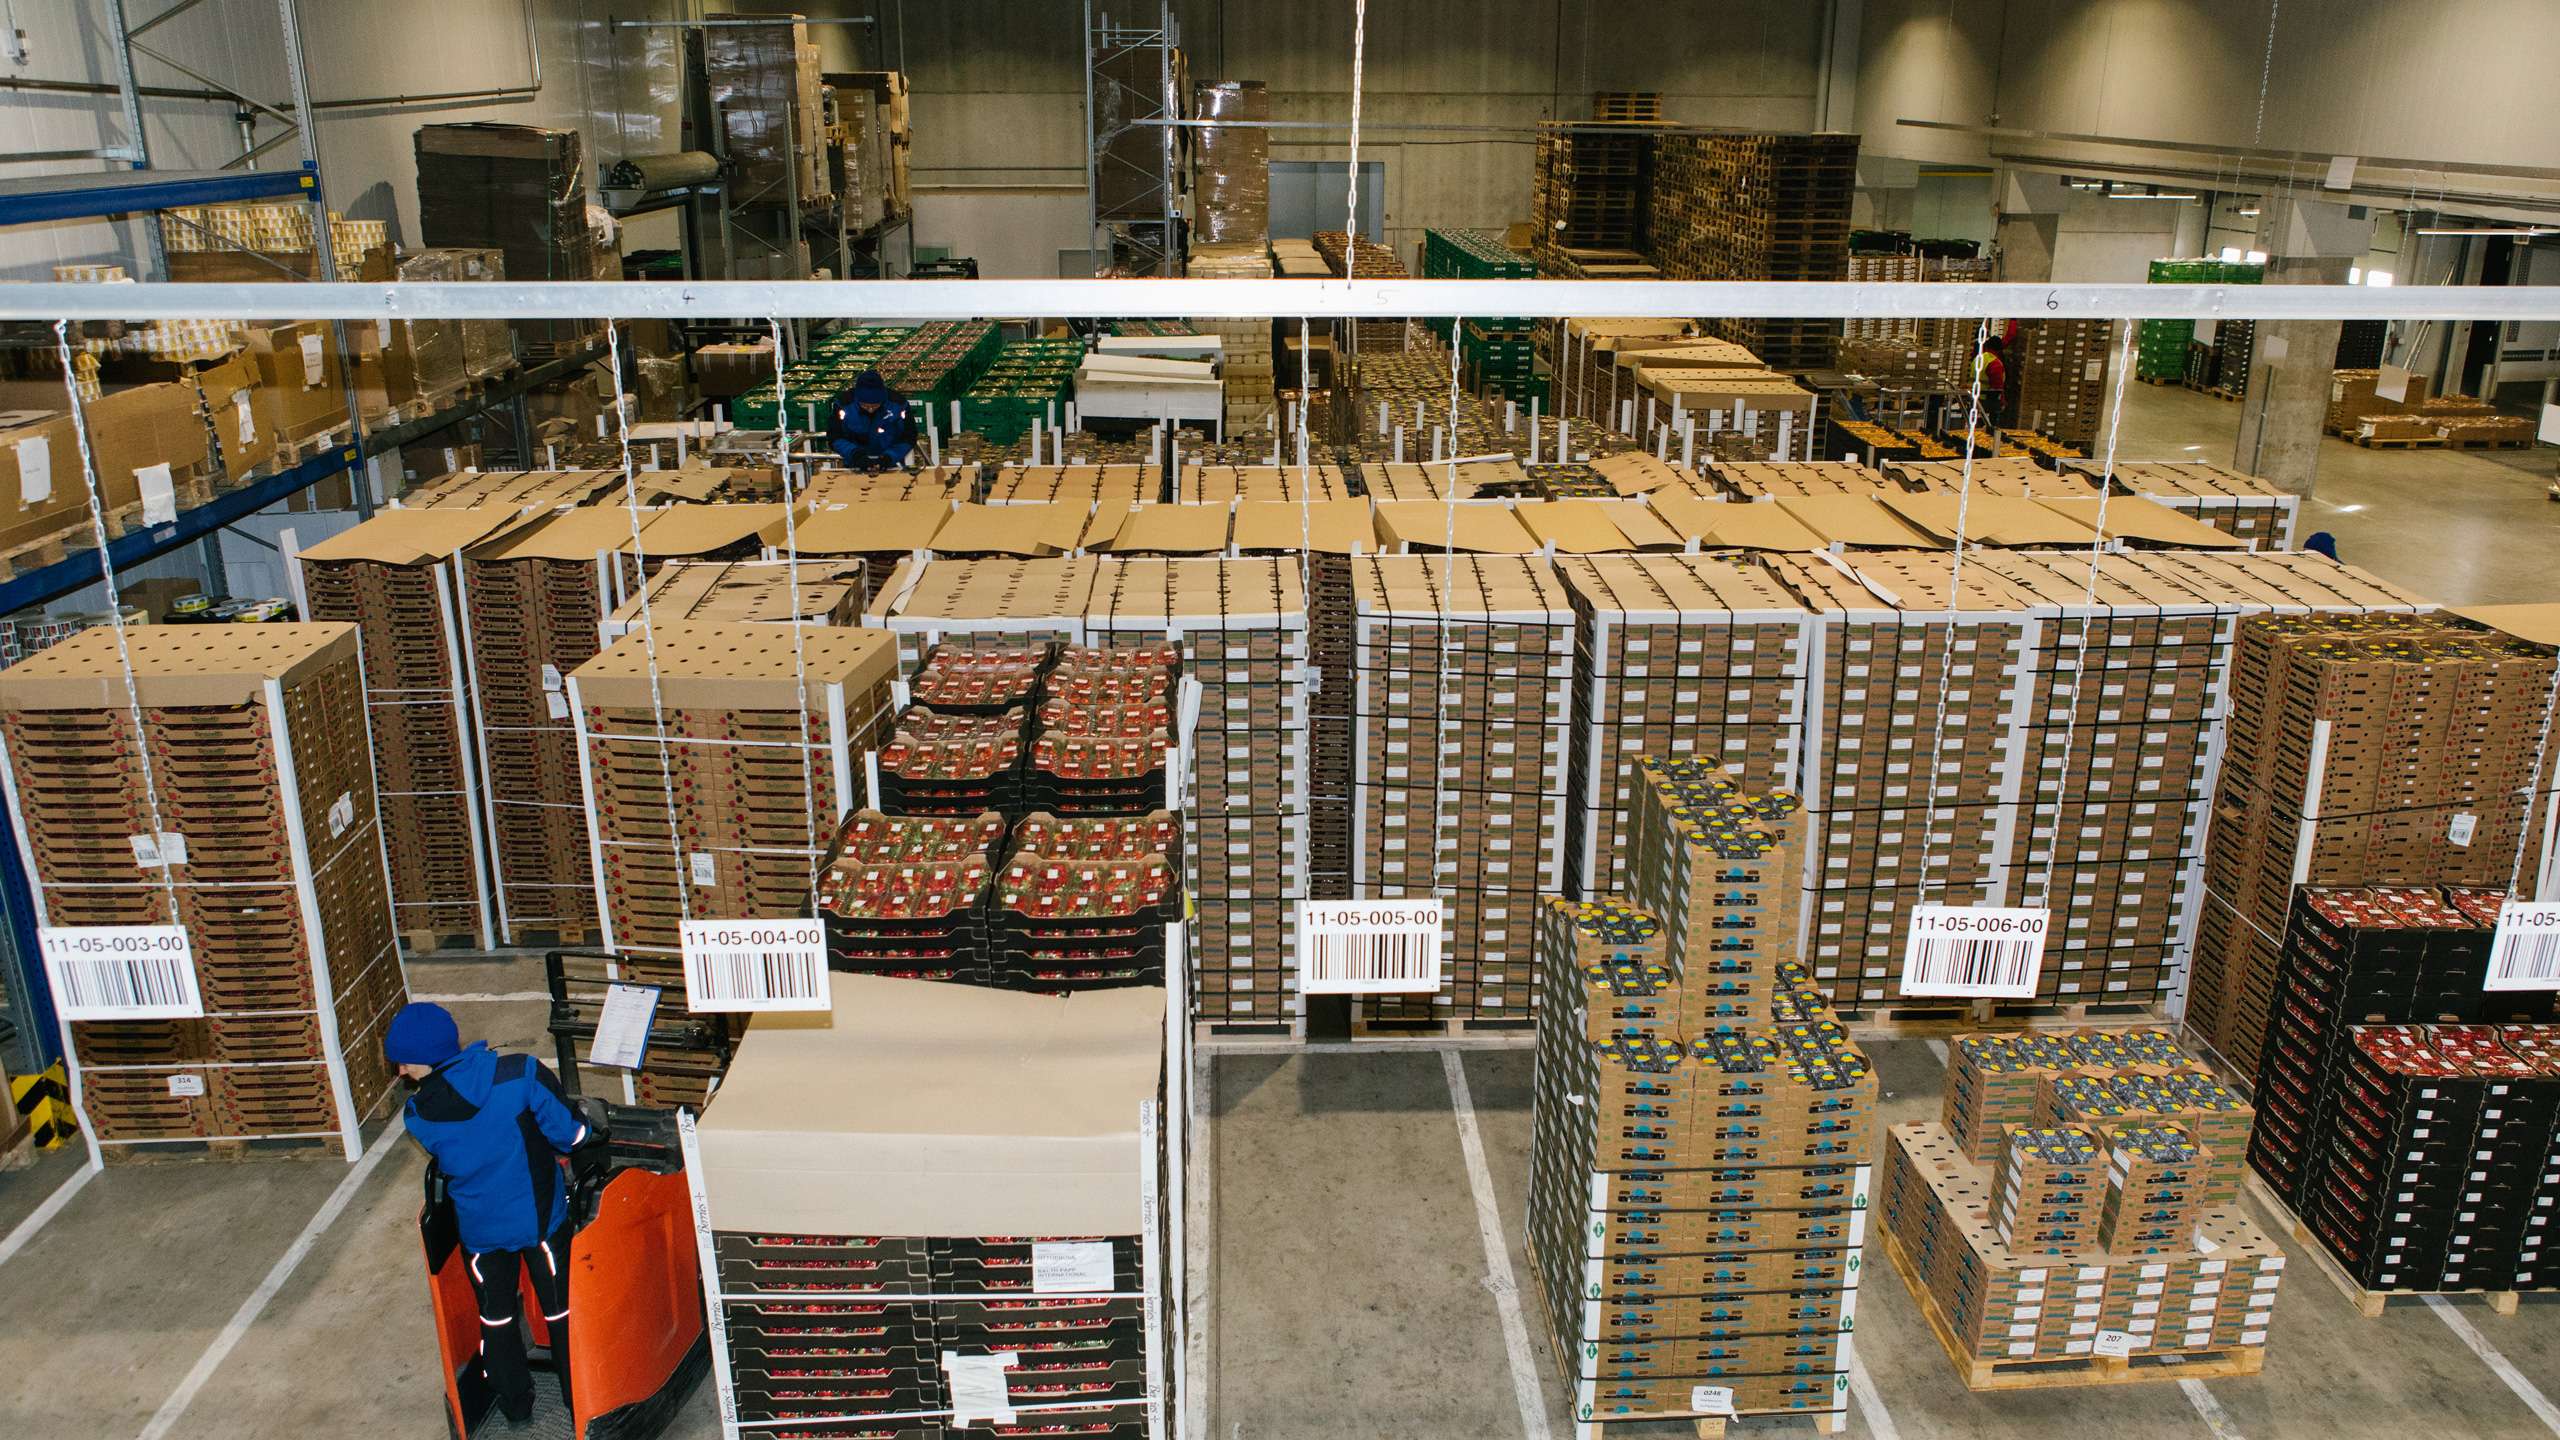 In a warehouse there are piles of pallets with fruit and vegetables. A PAPP employee rides a pallet truck between the pallets.